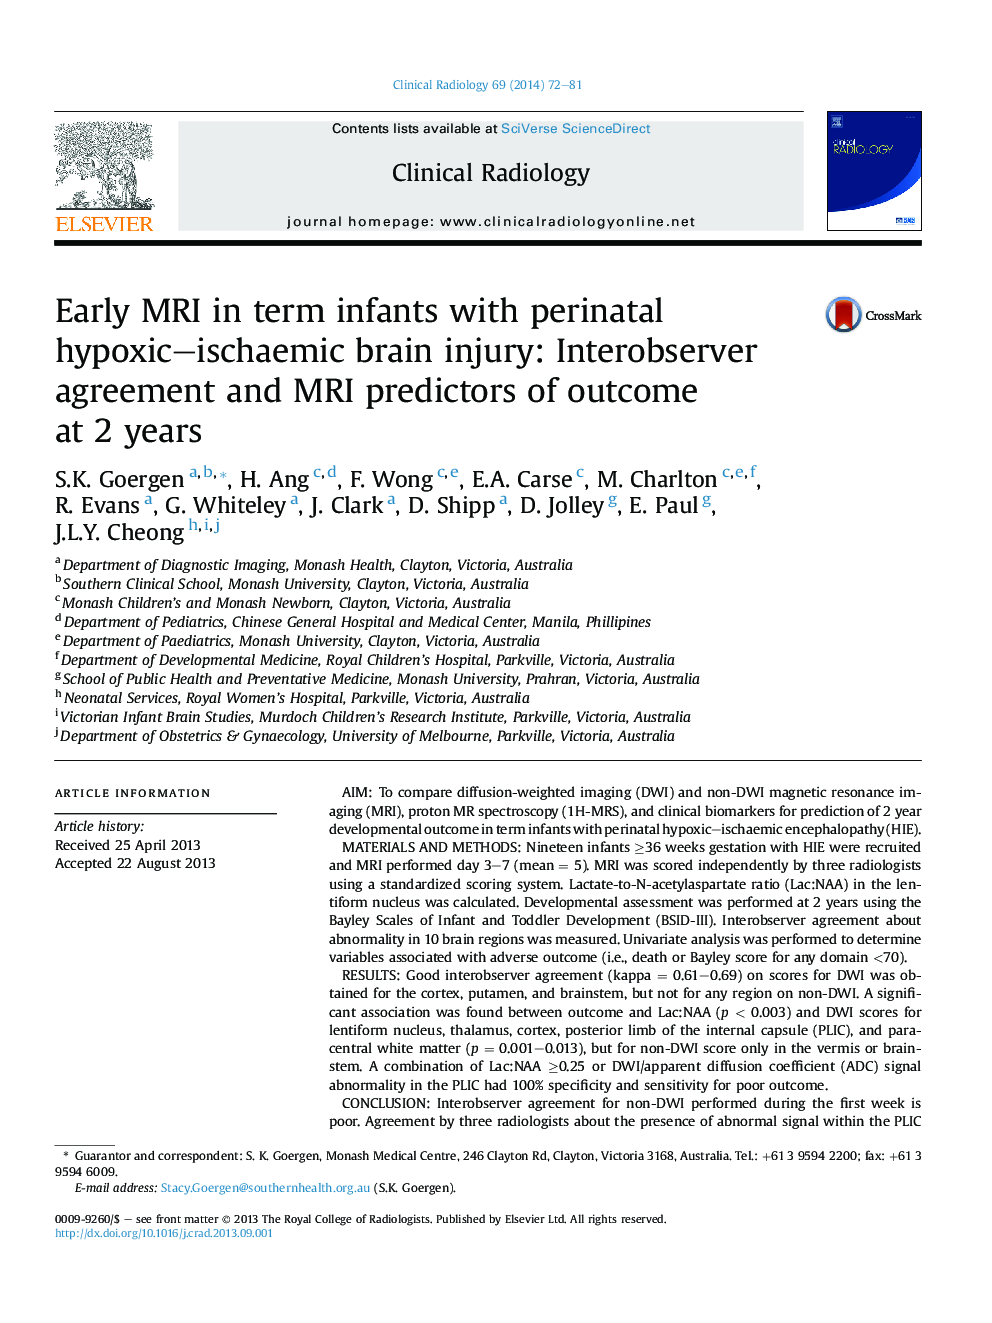 Early MRI in term infants with perinatal hypoxic–ischaemic brain injury: Interobserver agreement and MRI predictors of outcome at 2 years